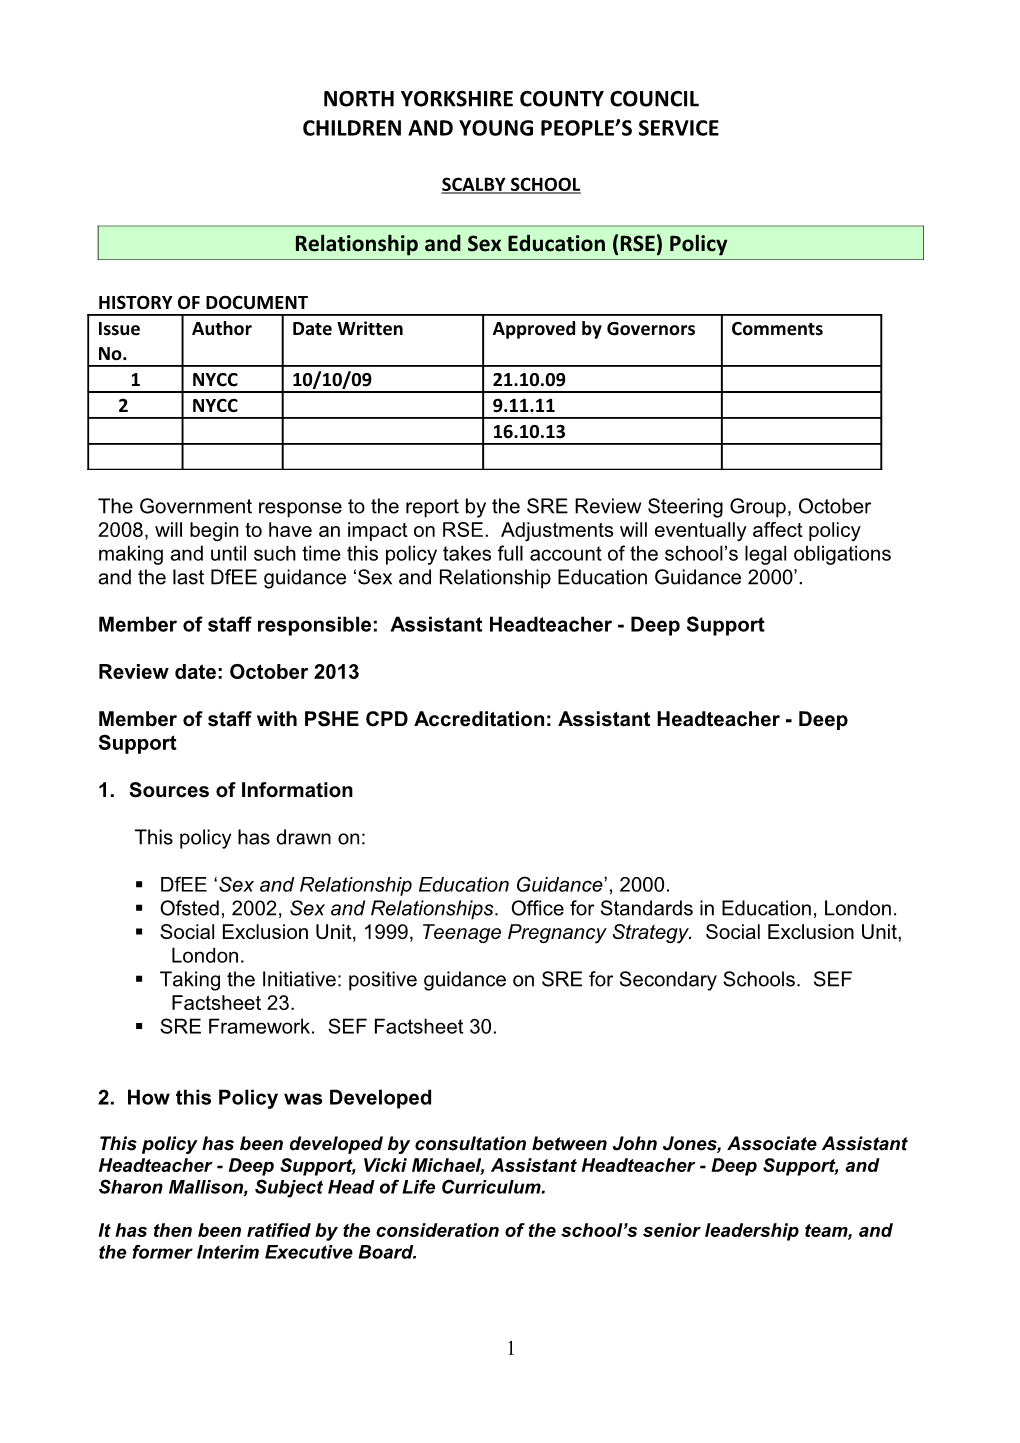 An Exemplar Relationship and Sex Education, RSE, Policy KS3/KS4